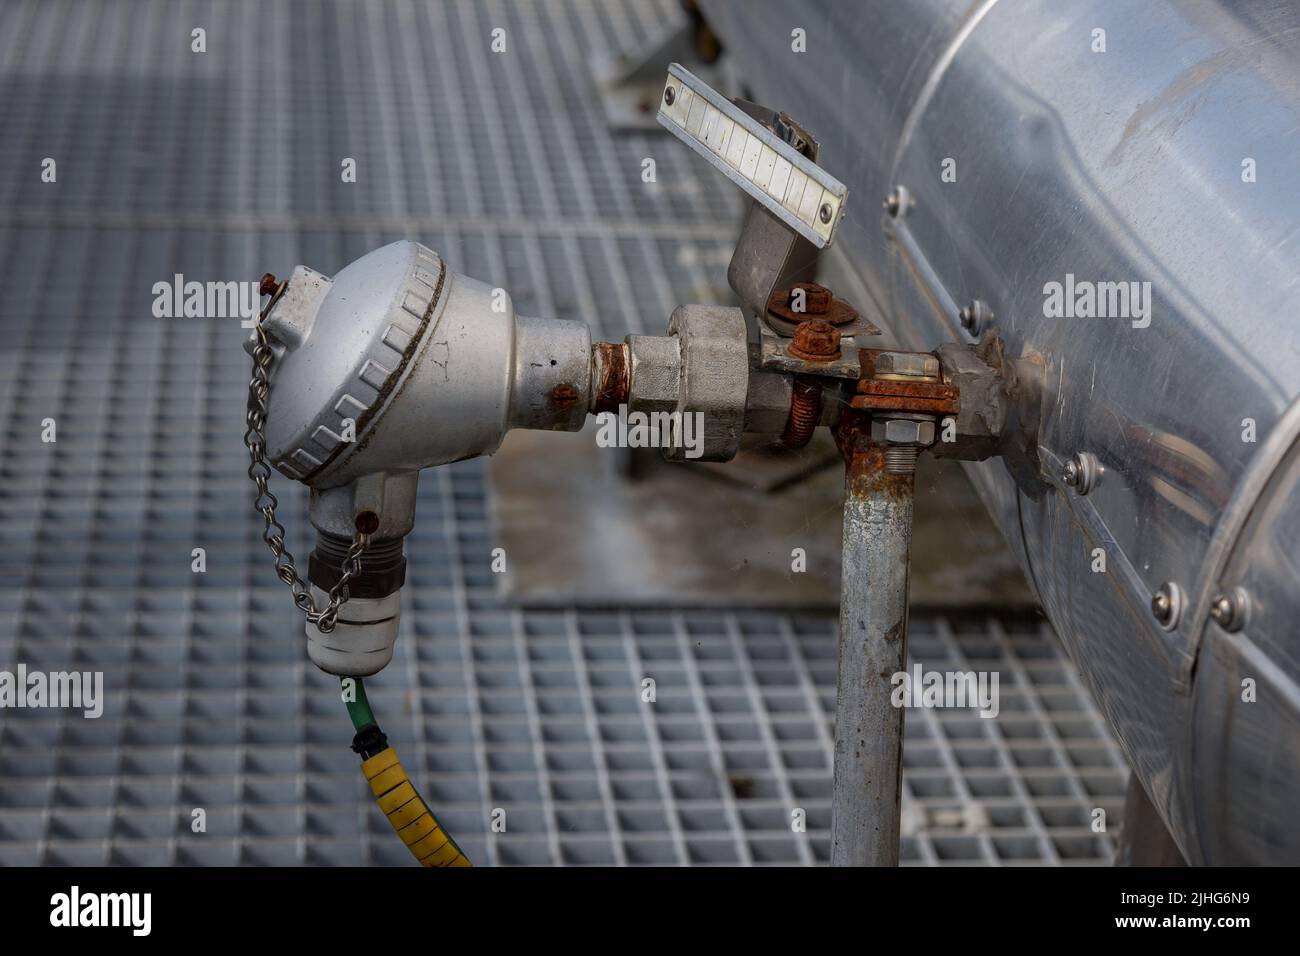 A metal thermocouple in an industrial environment, placed to measure and monitor the temperature in an existing process. Stock Photo